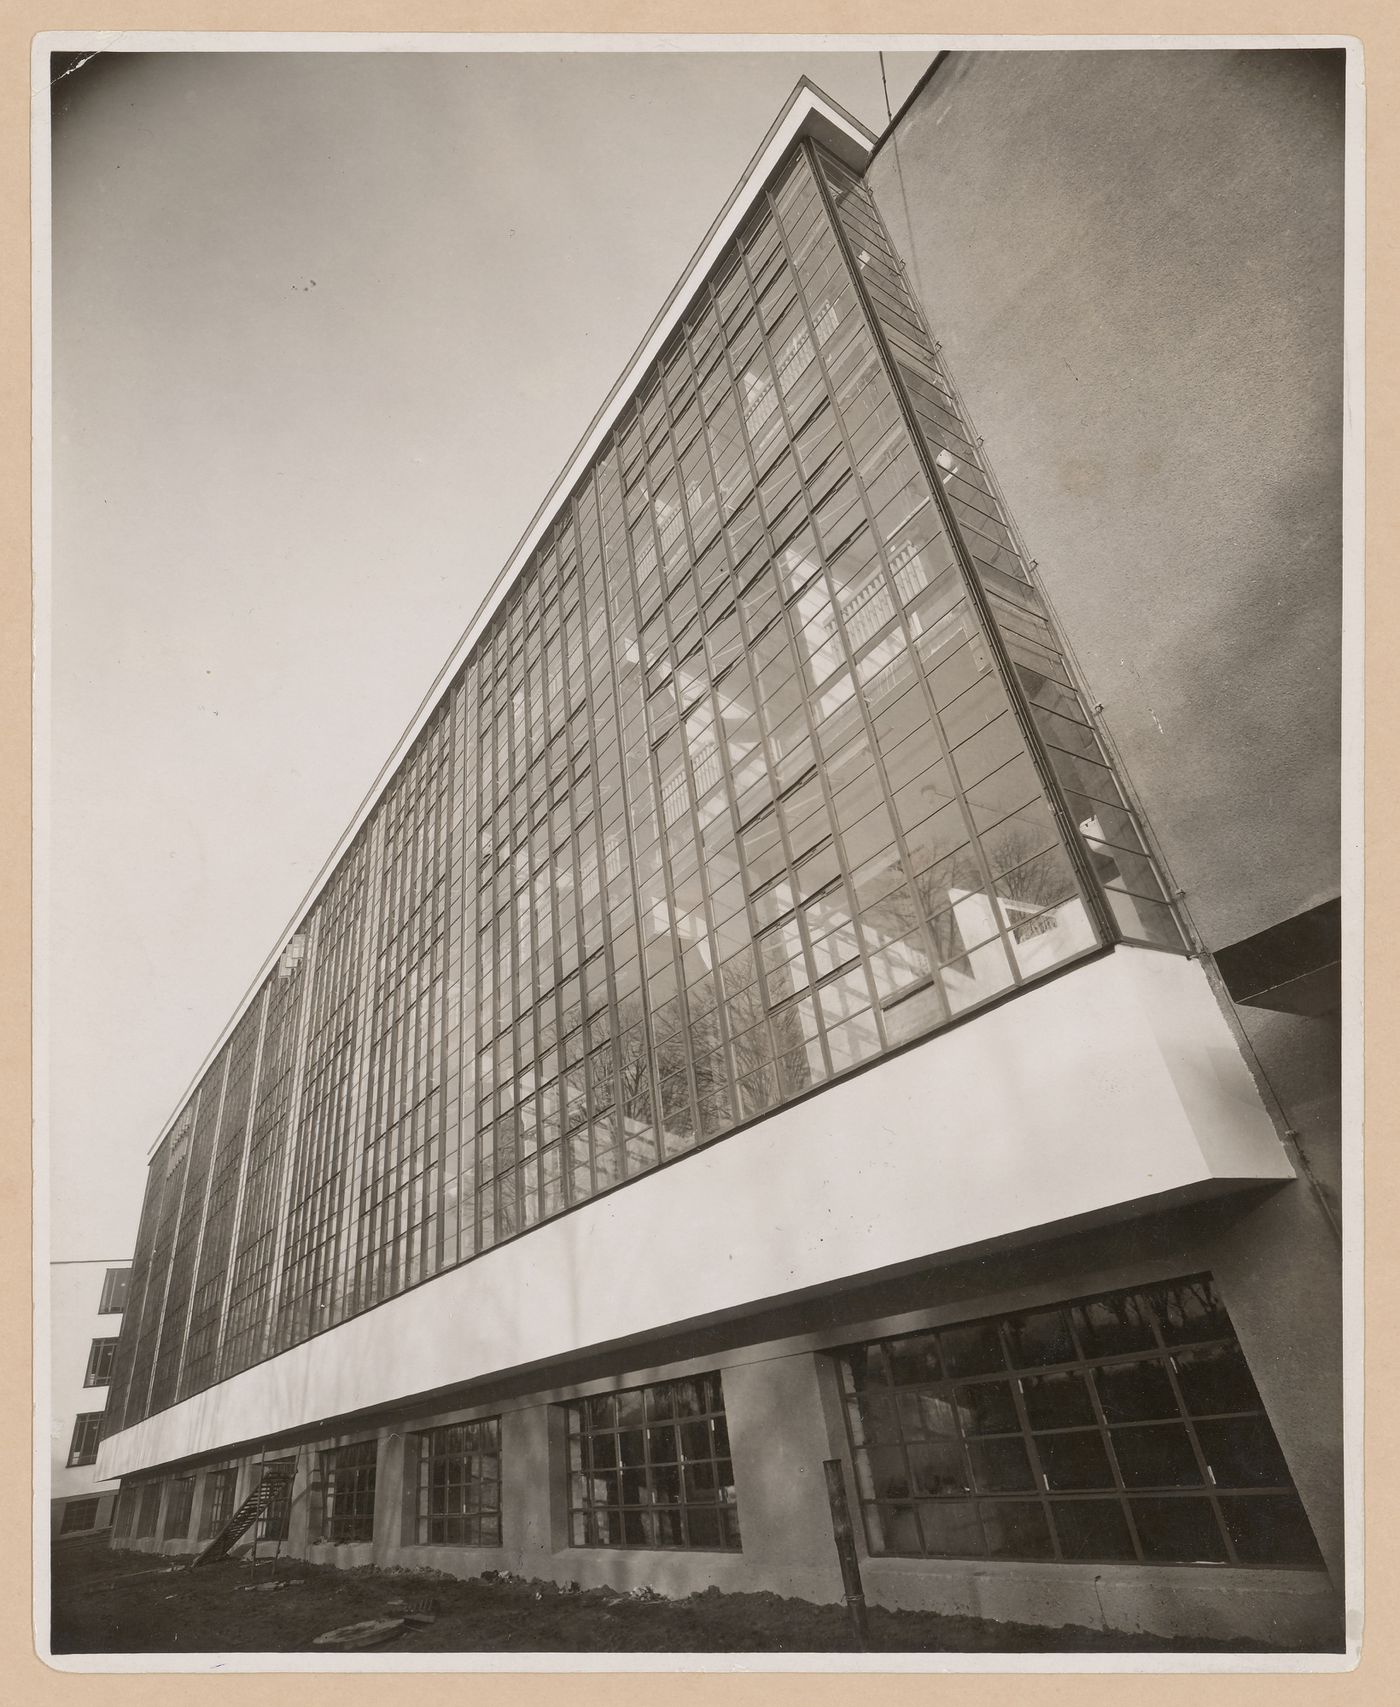 Exterior view of the workshop wing of the Bauhaus building showing a glass curtain wall, Dessau, Germany